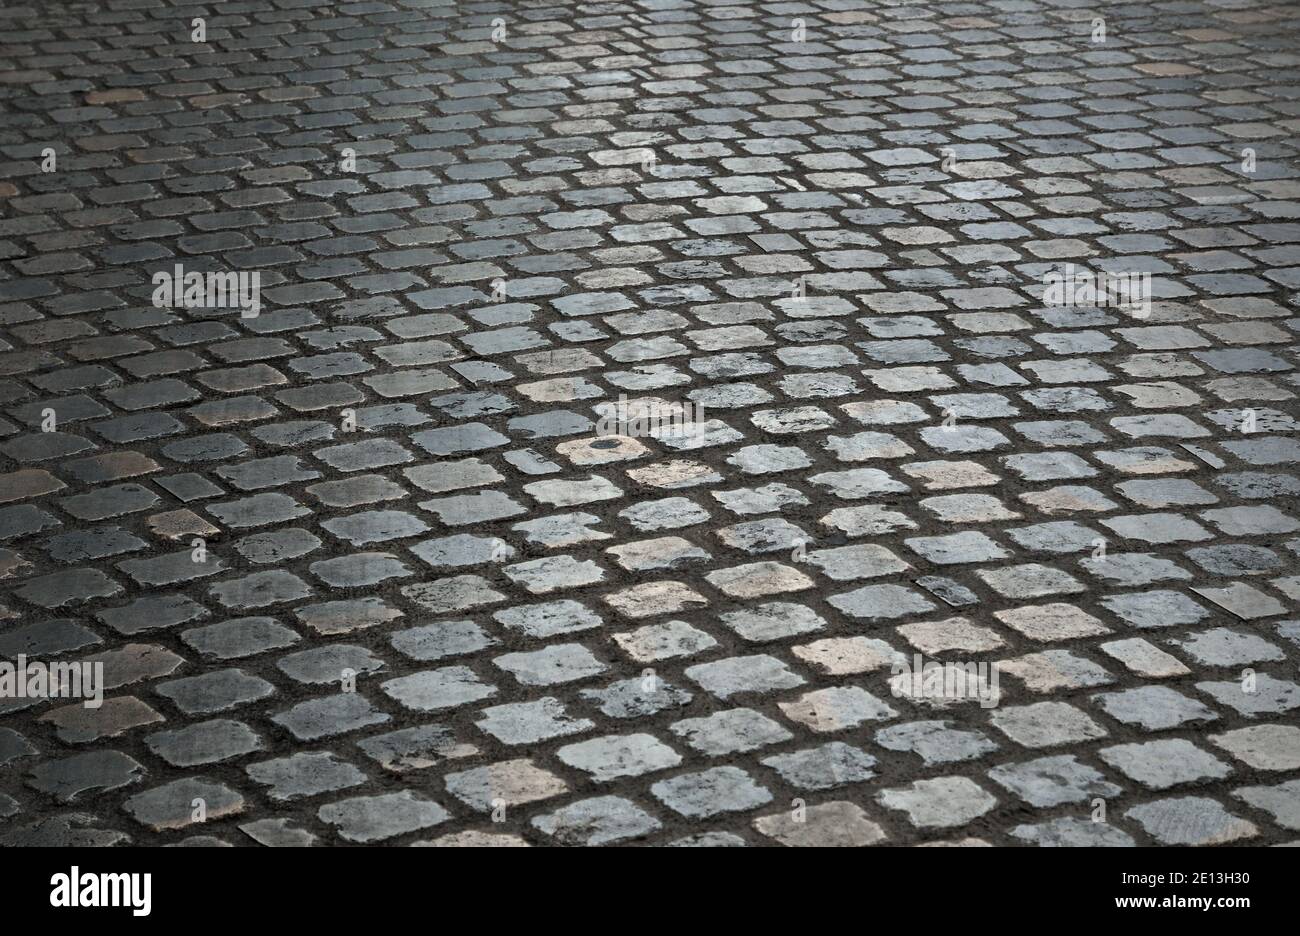 Cobblestone pavement with diminishing perspective Stock Photo